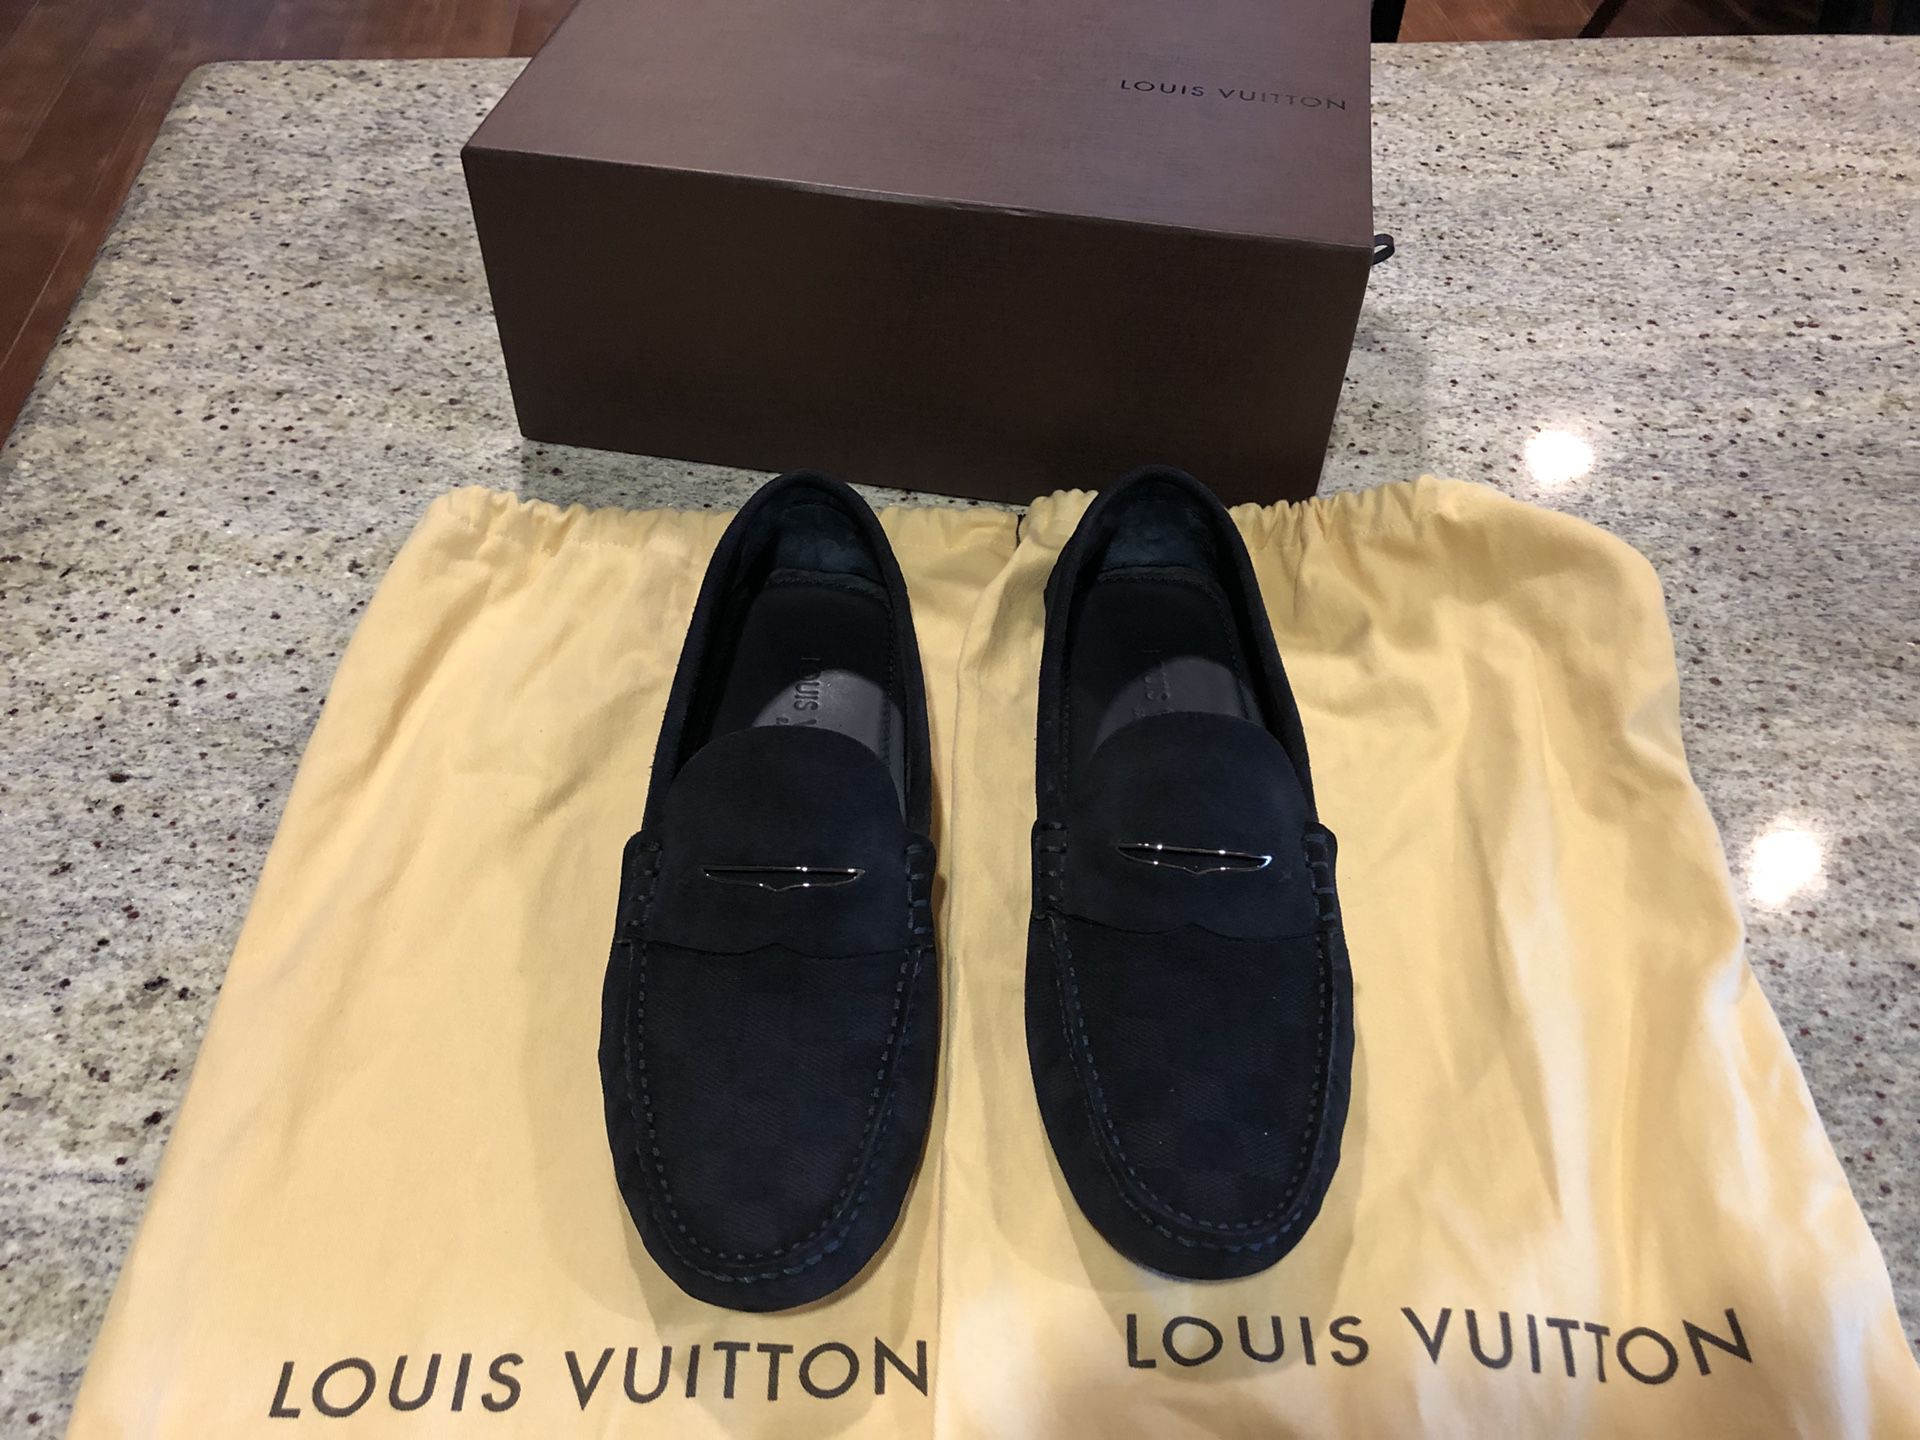 Louis Vuitton loafers 7 1/2, USED/ PERFECT CONDIOTION for Sale